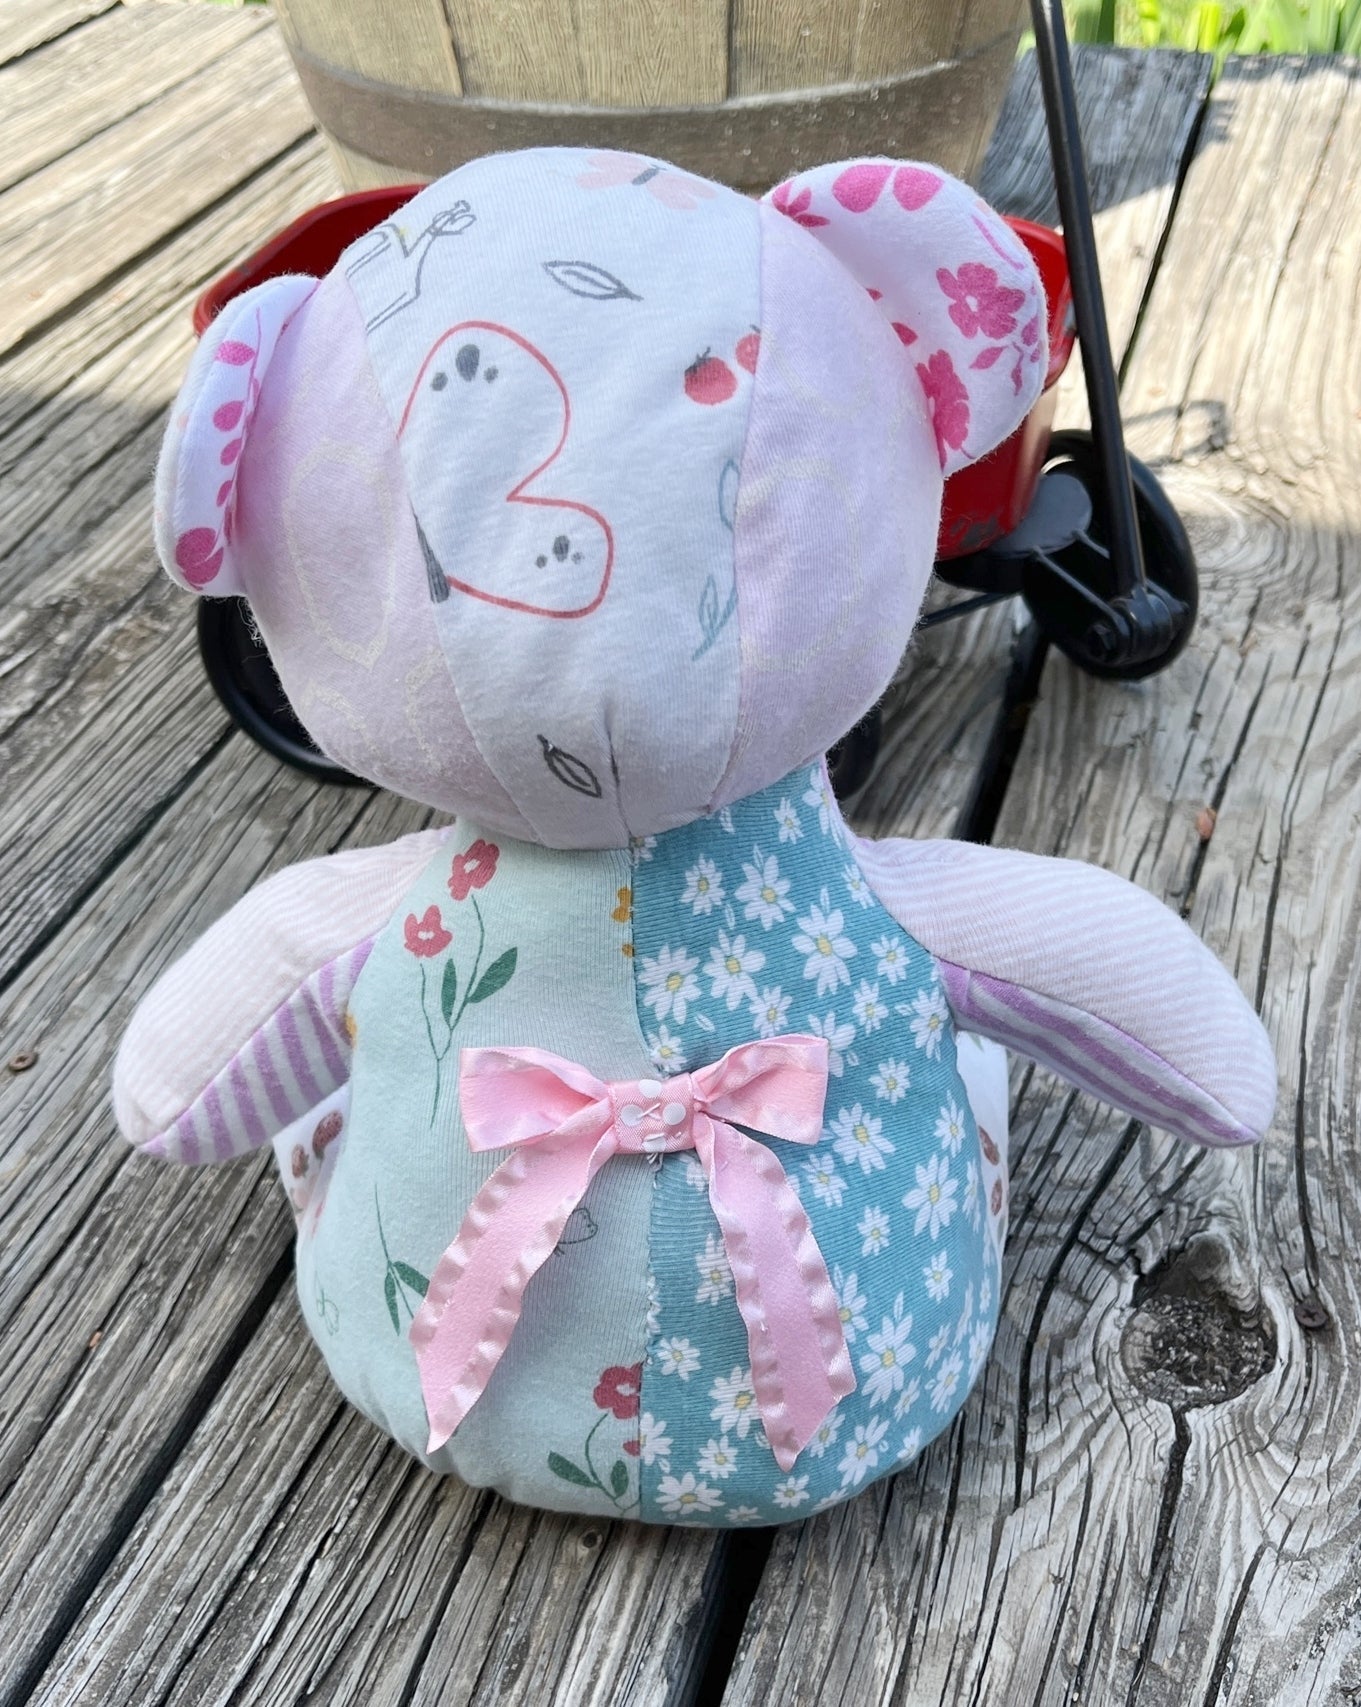 custom memory bear, back of the bear, (shown girl, made from baby clothes)